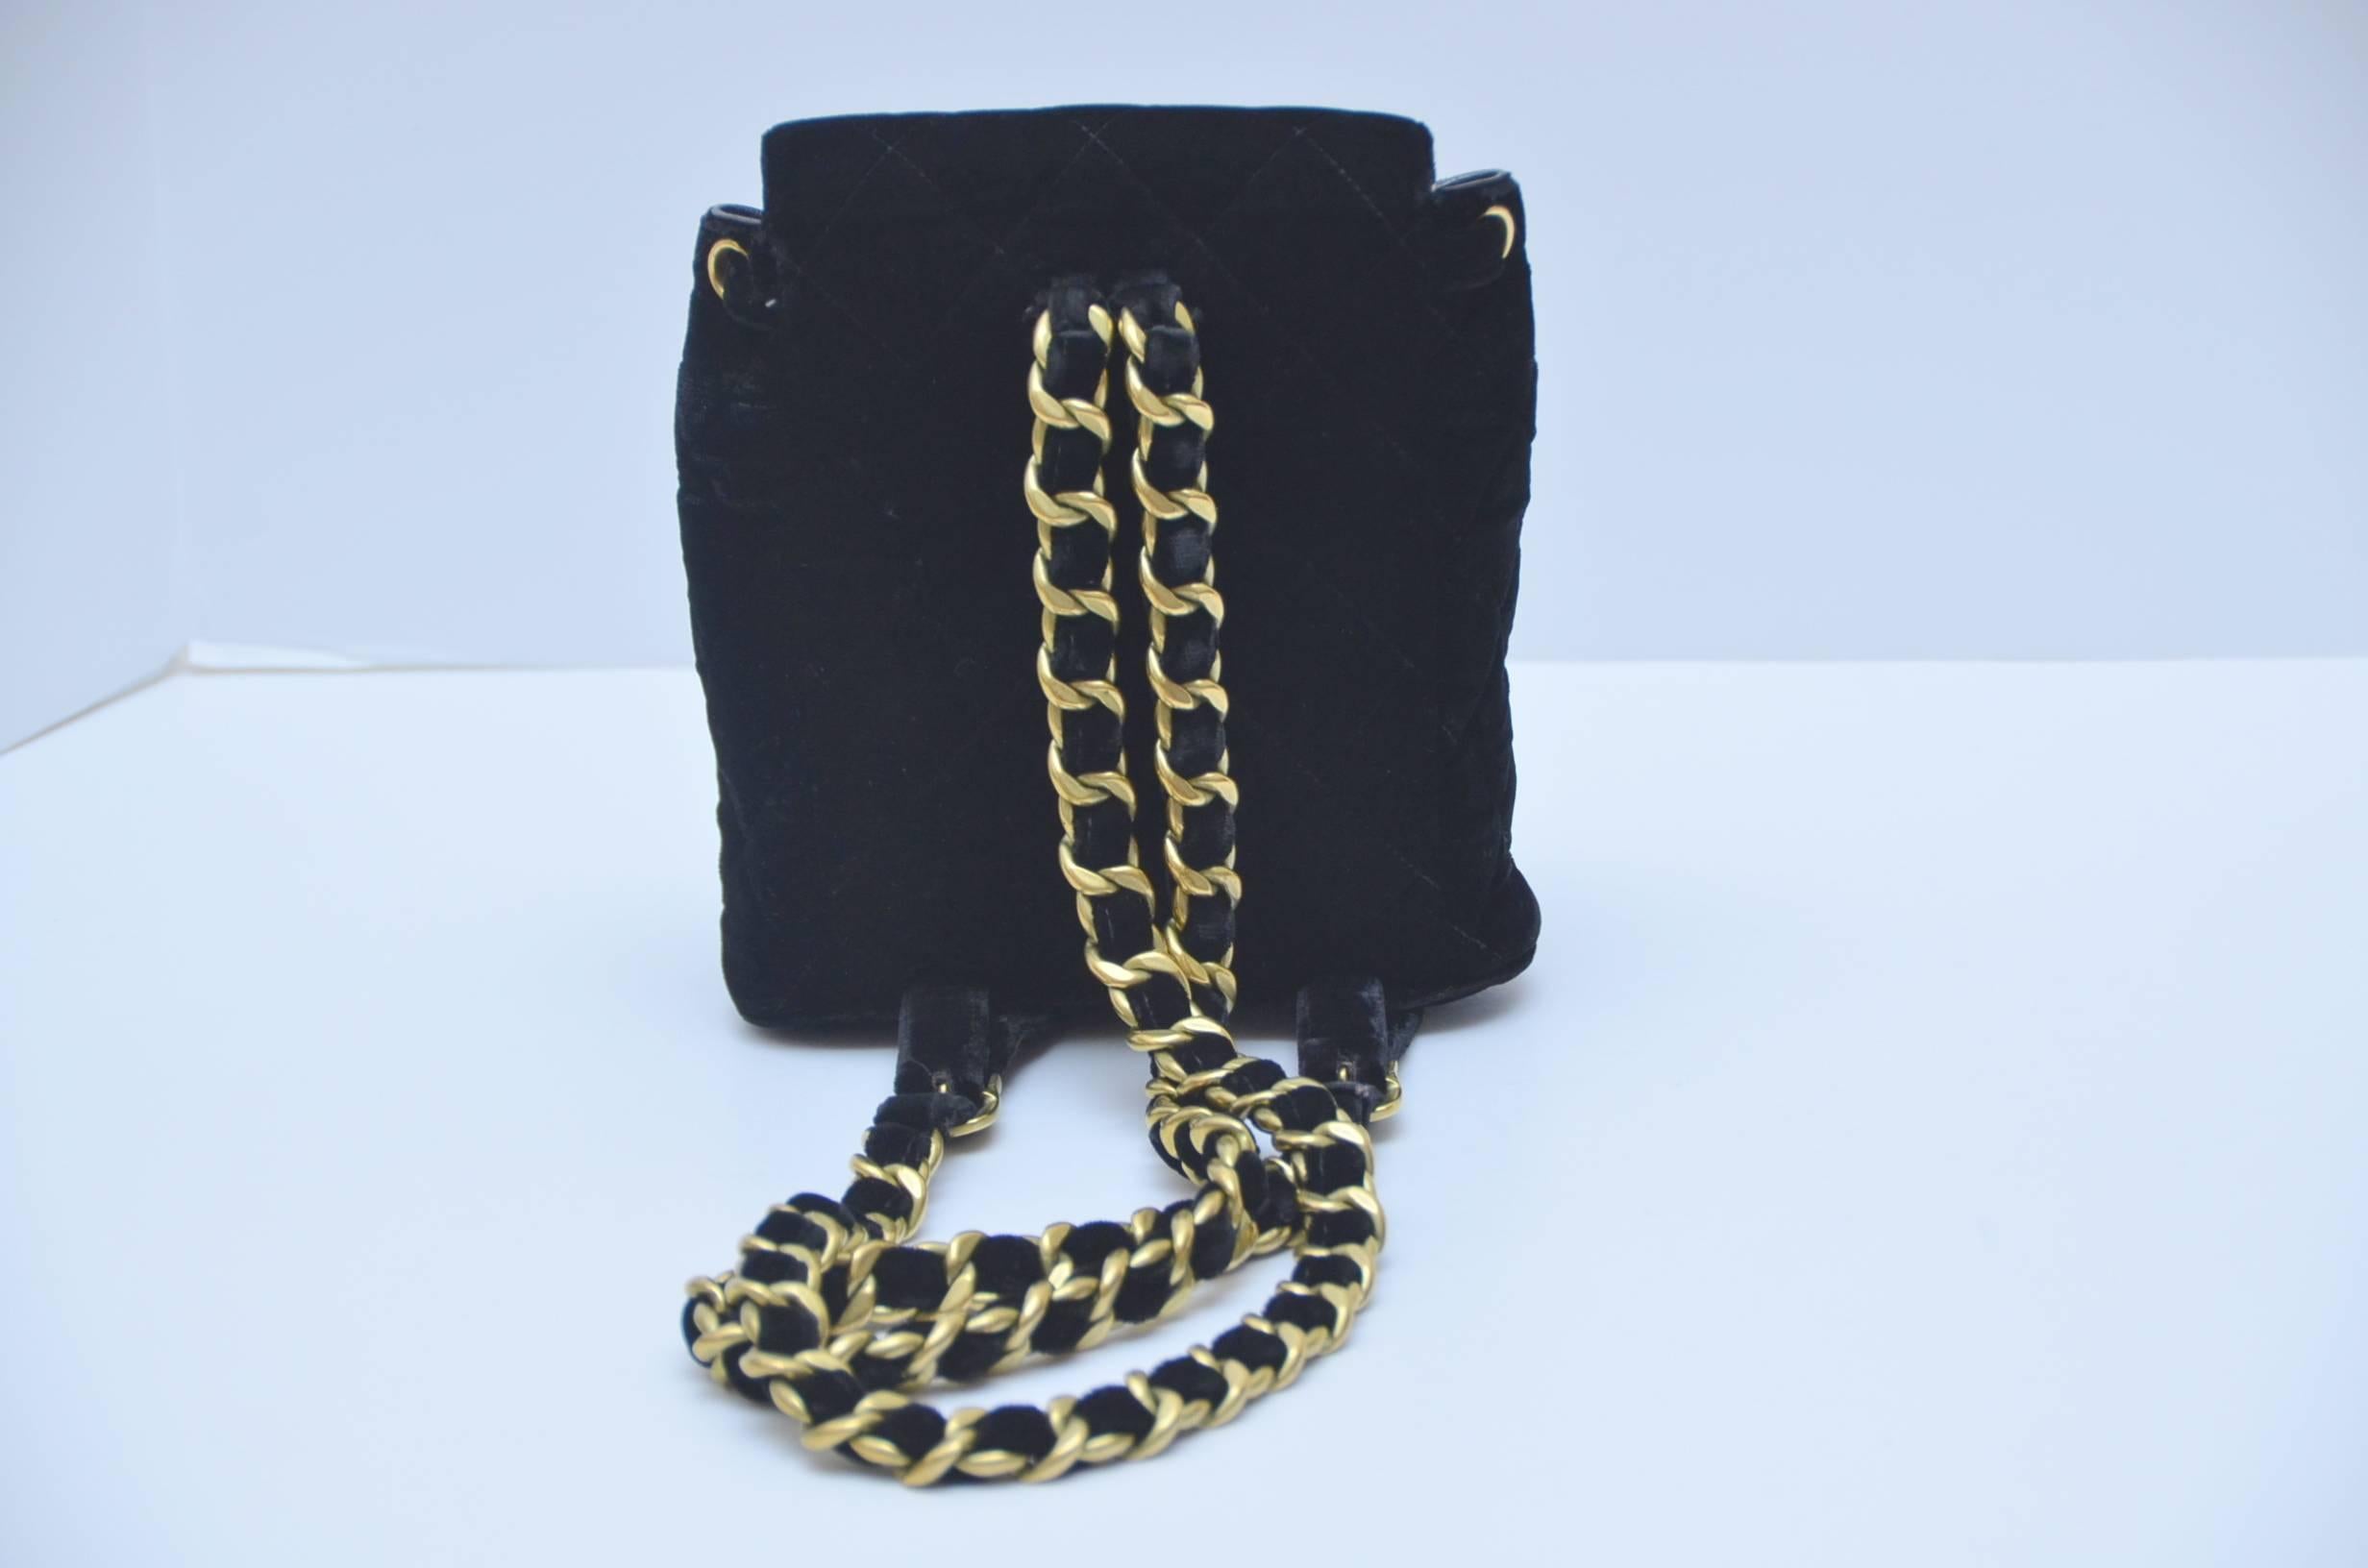 Chanel quilted black velvet, and  leather lined mini back pack from 1990's.
Double shoulder straps have gold chain and adjustable buckles.Upper flap opens to the main compartment and is lined in black leather.
The lower outside flap opens to a